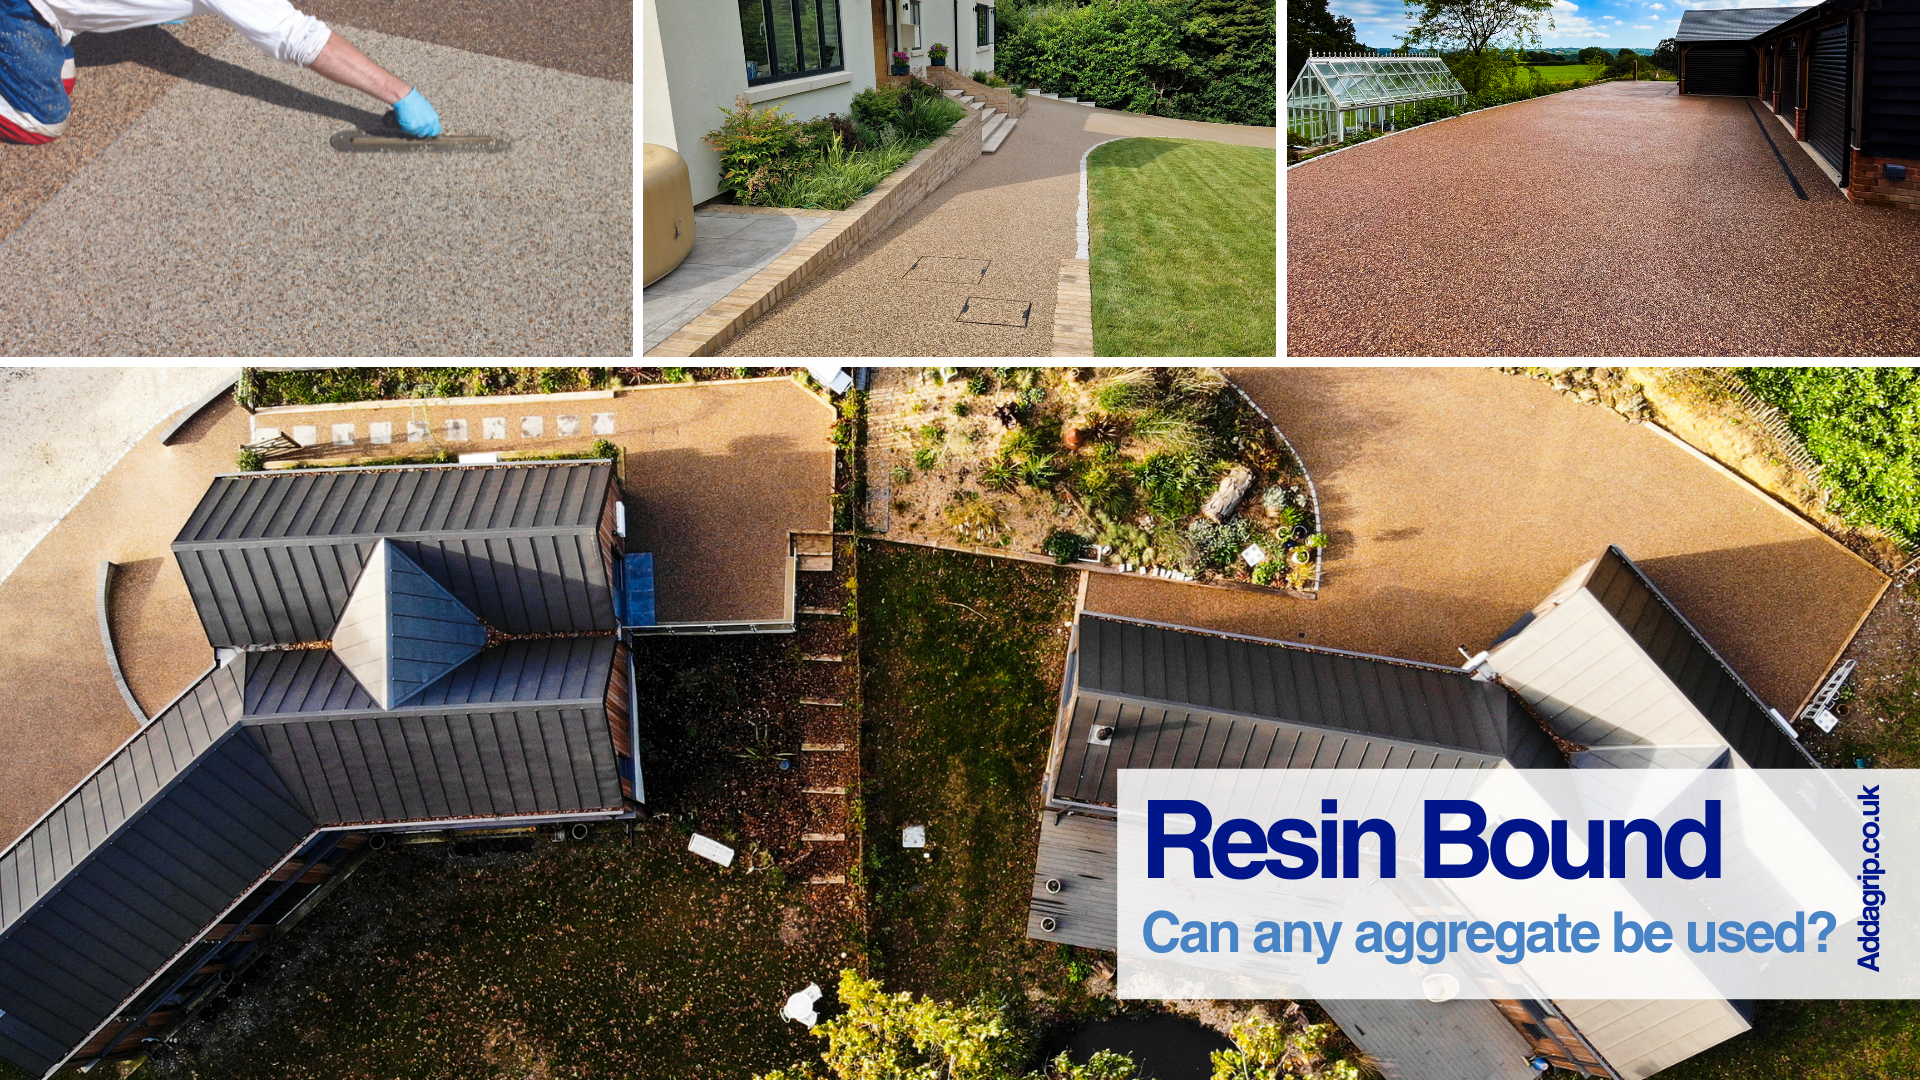 Compilation of various Resin Bound projects by Addagrip Terraco